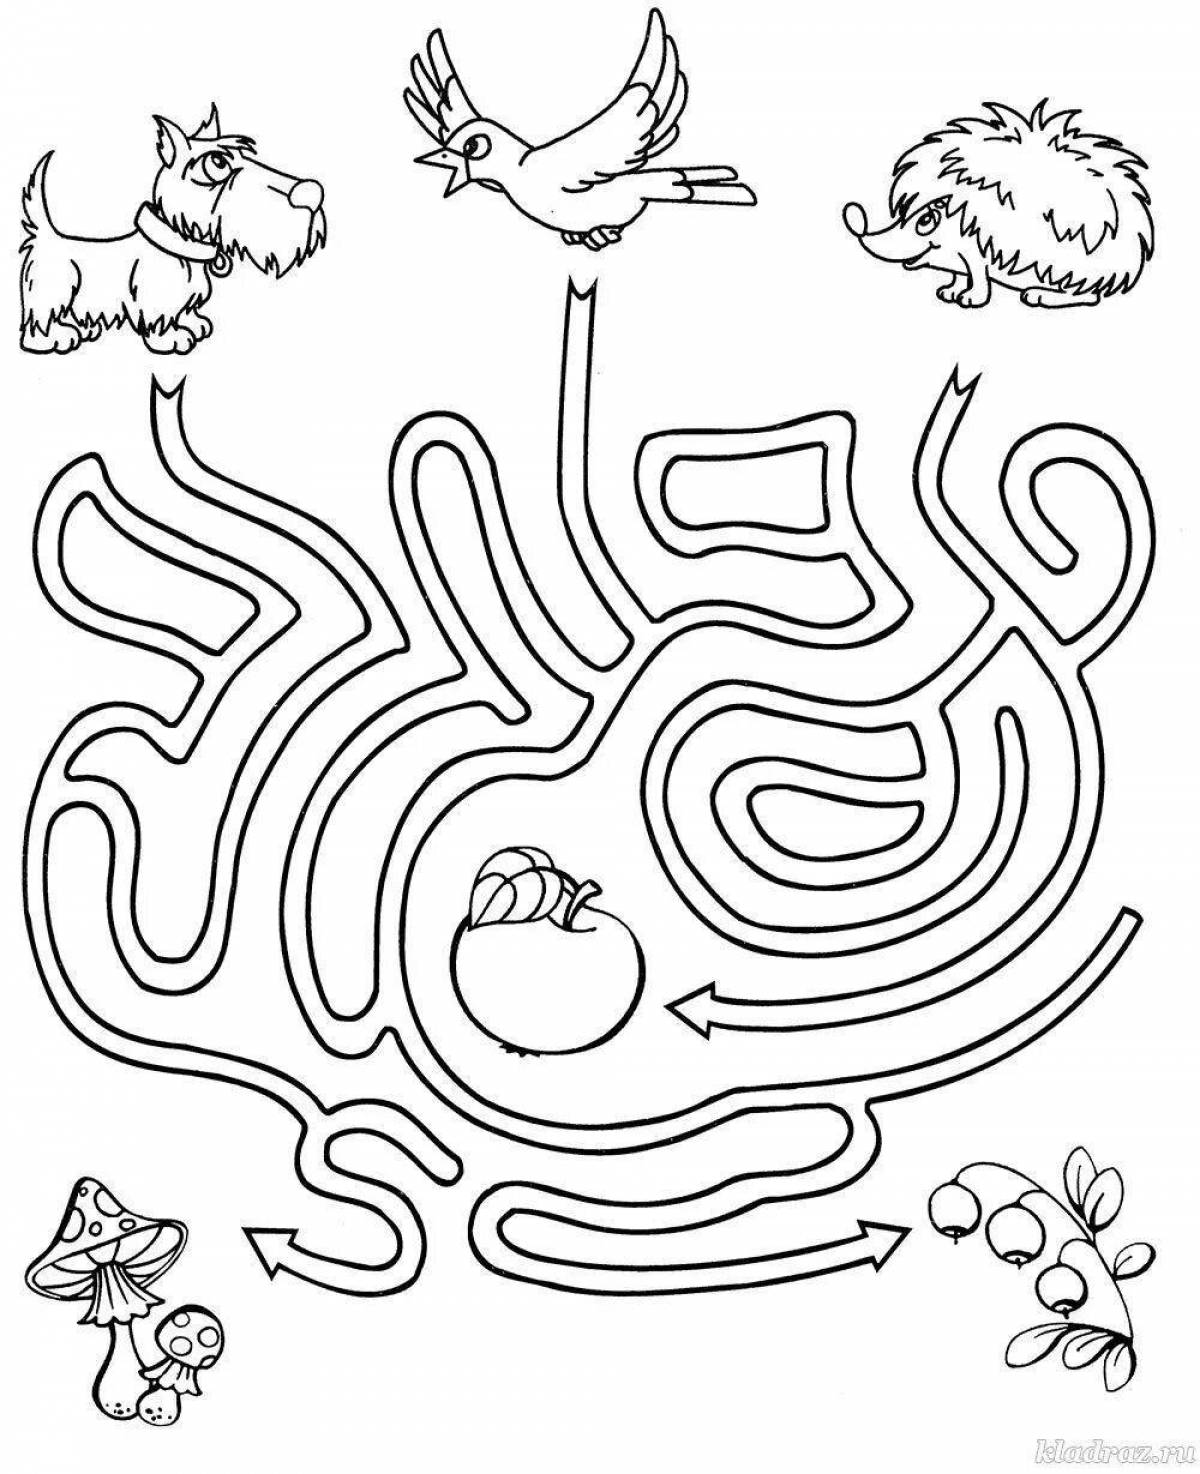 Fun coloring games for 4 year olds